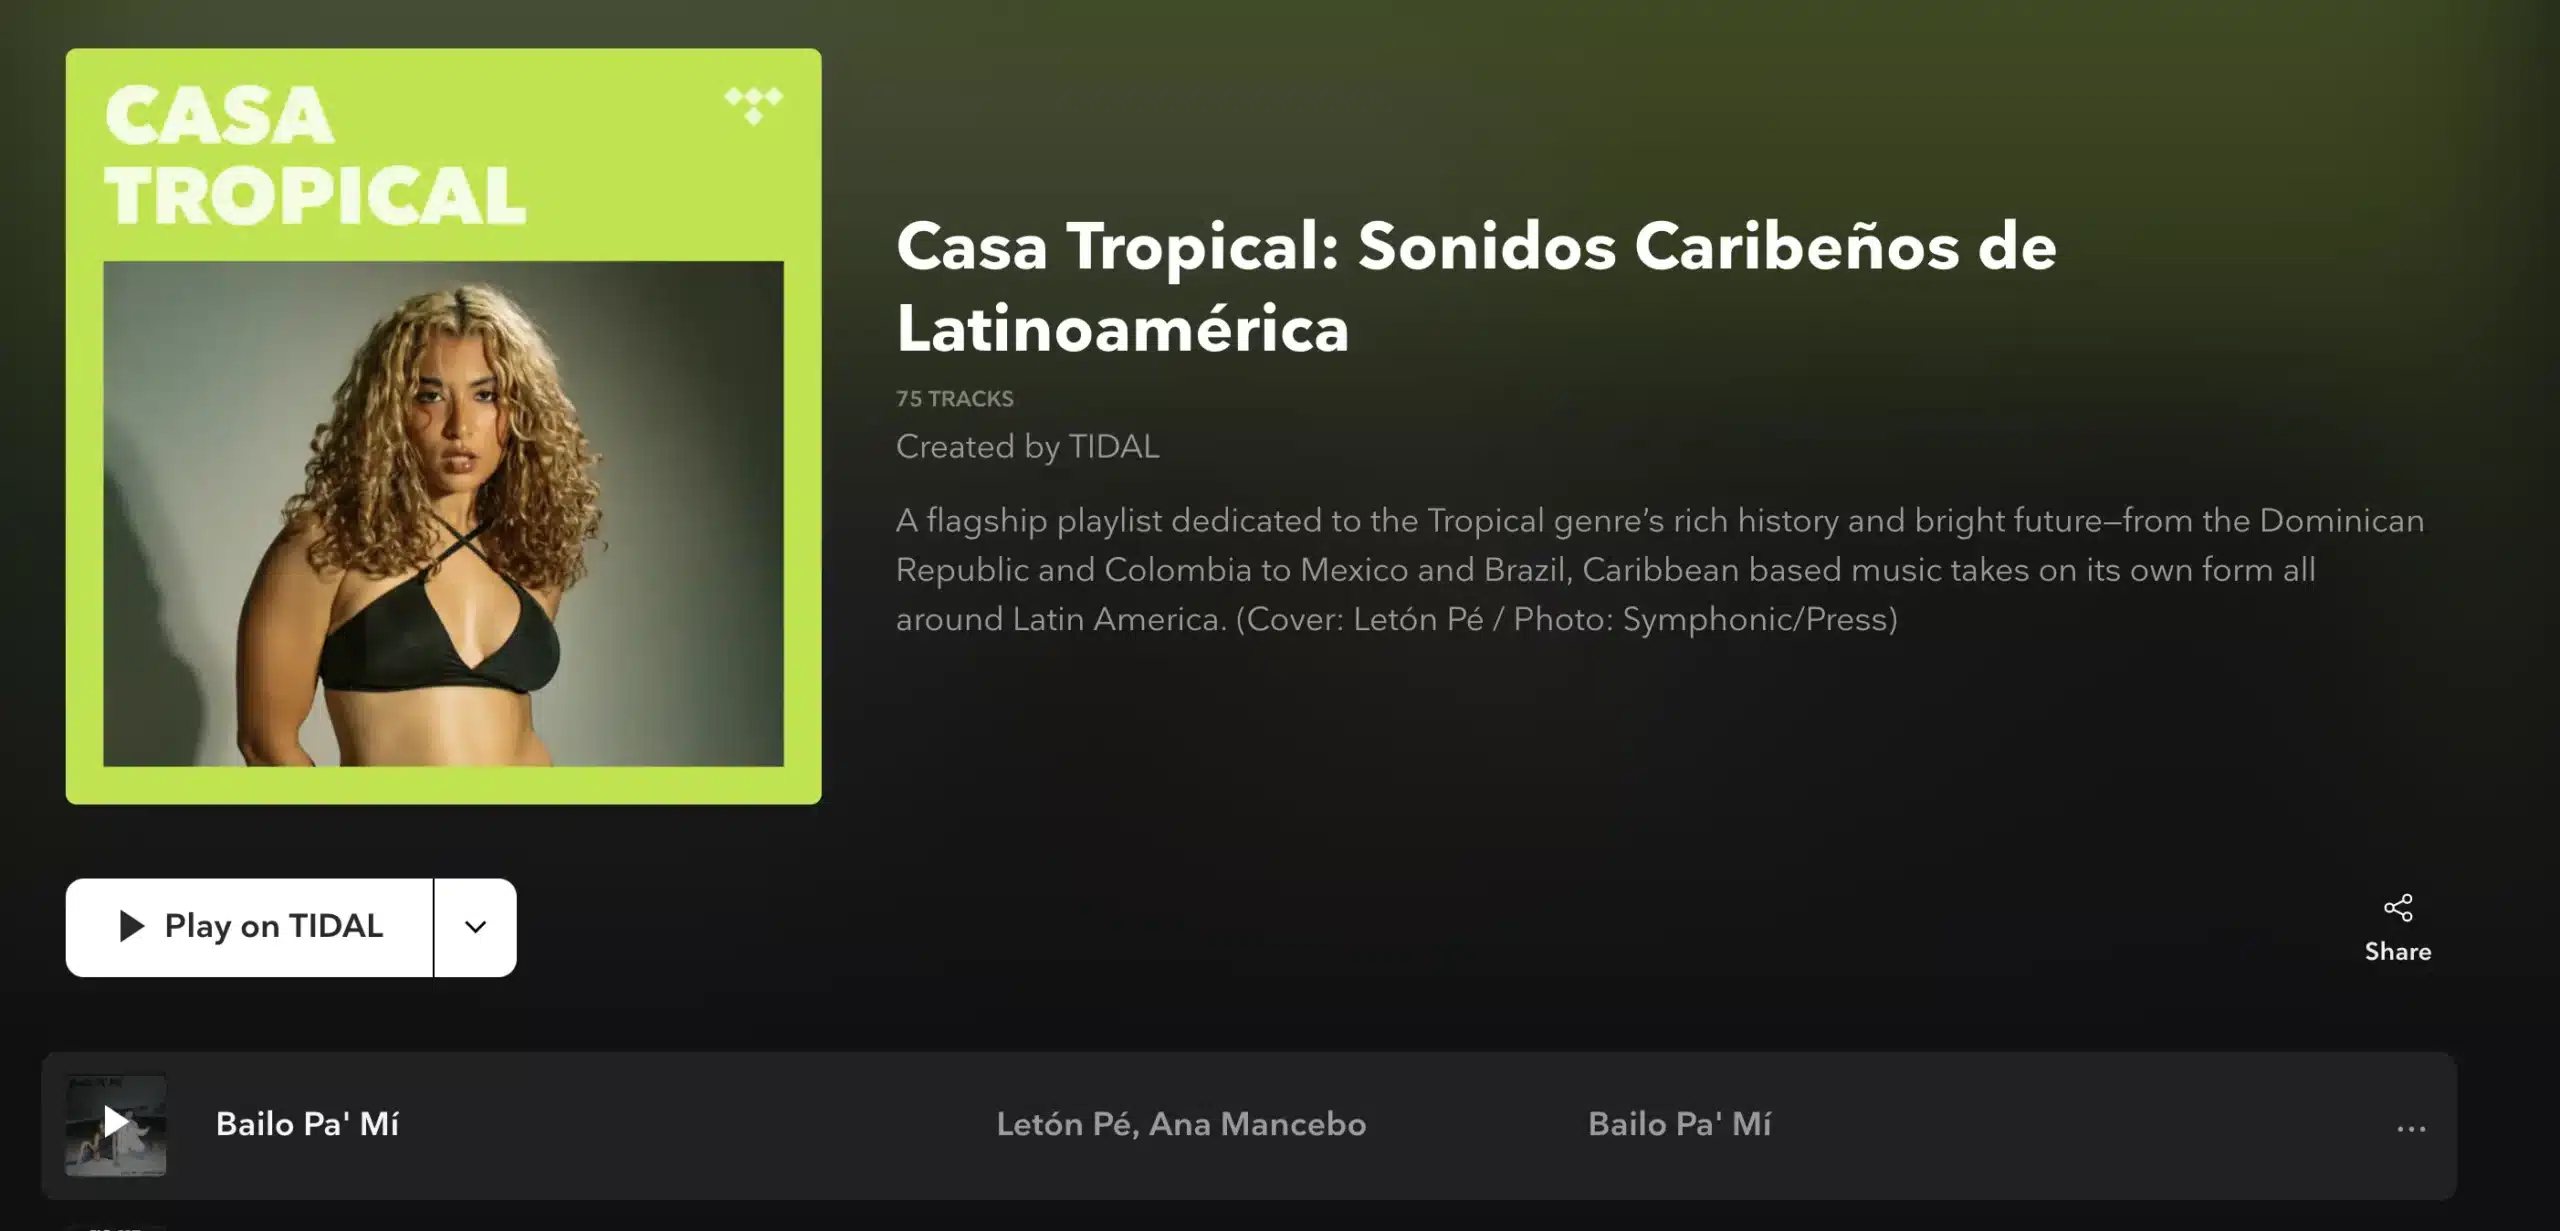 A picture of Grace Gaustad in a bikini with the words casa tropical.